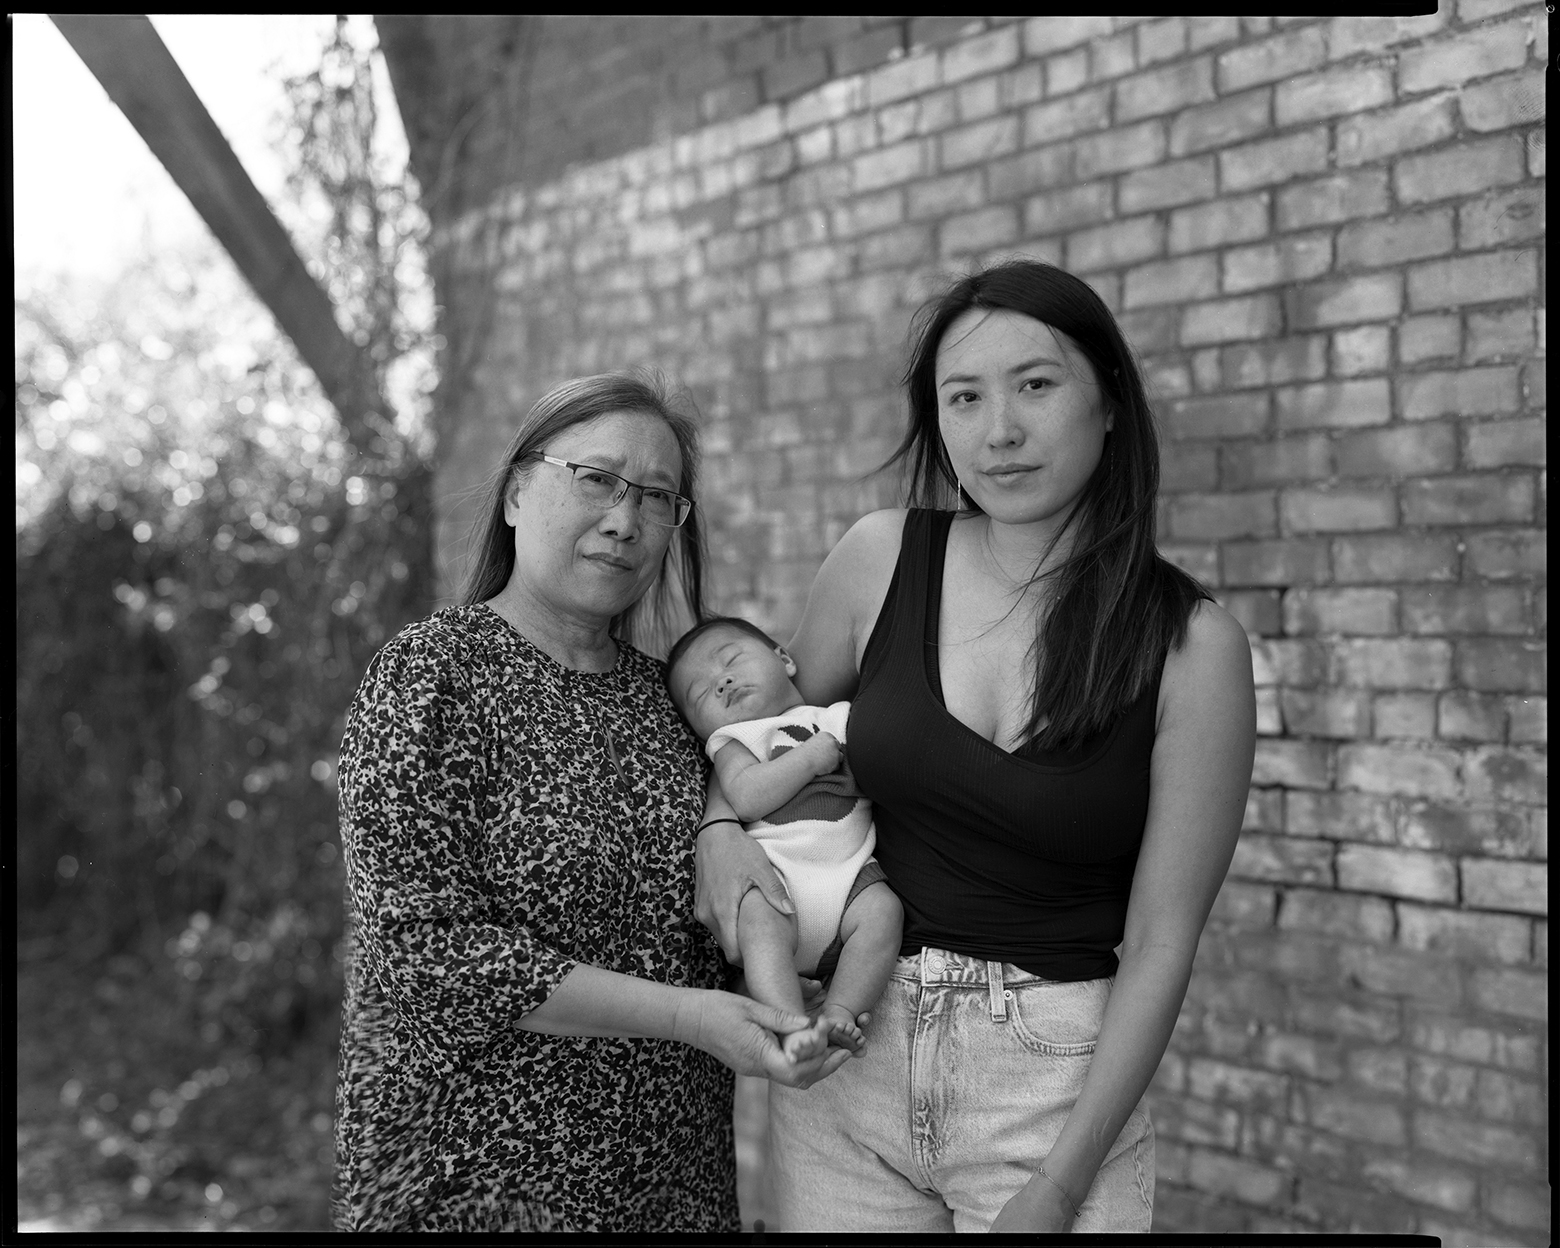 WeiWua stands next to FeiFei who holds Willow, who is asleep, against her hip with her right arm. WeiWua and FeiFei look into the camera while they stand in front of the side of a brick building in Savannah, Georgia.